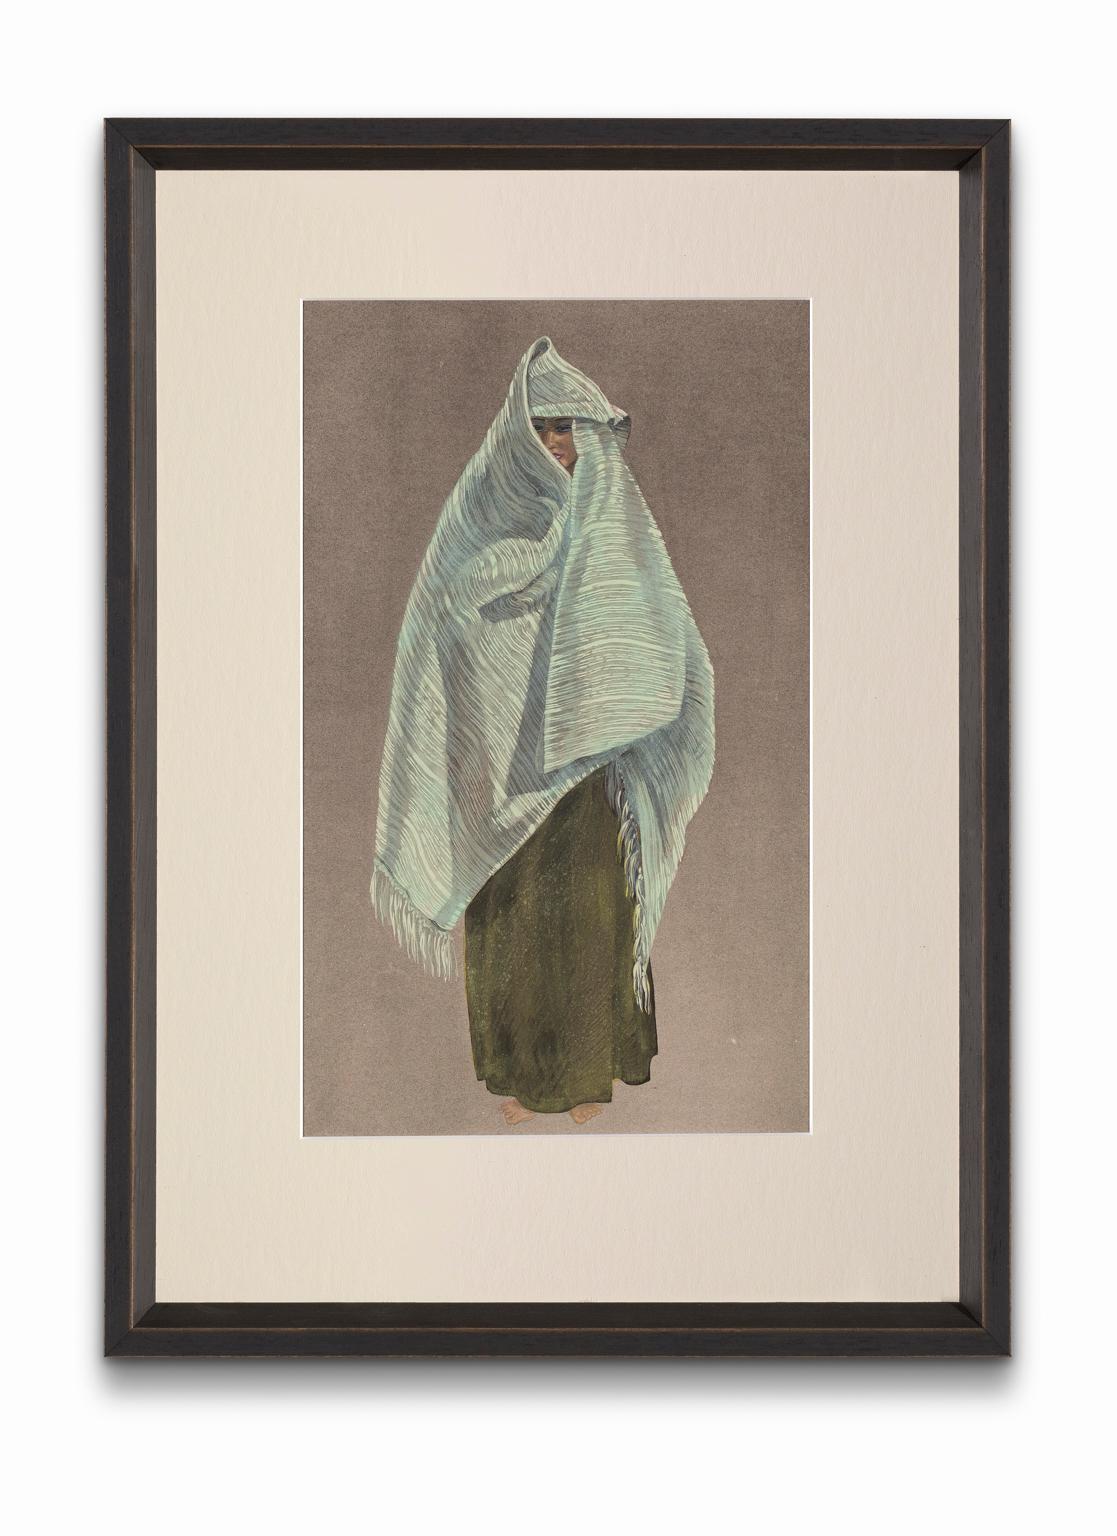 Jean Besancenot Portrait Print - "Woman of Tiznit Wearing the Amendil", from "Costumes of Morocco"